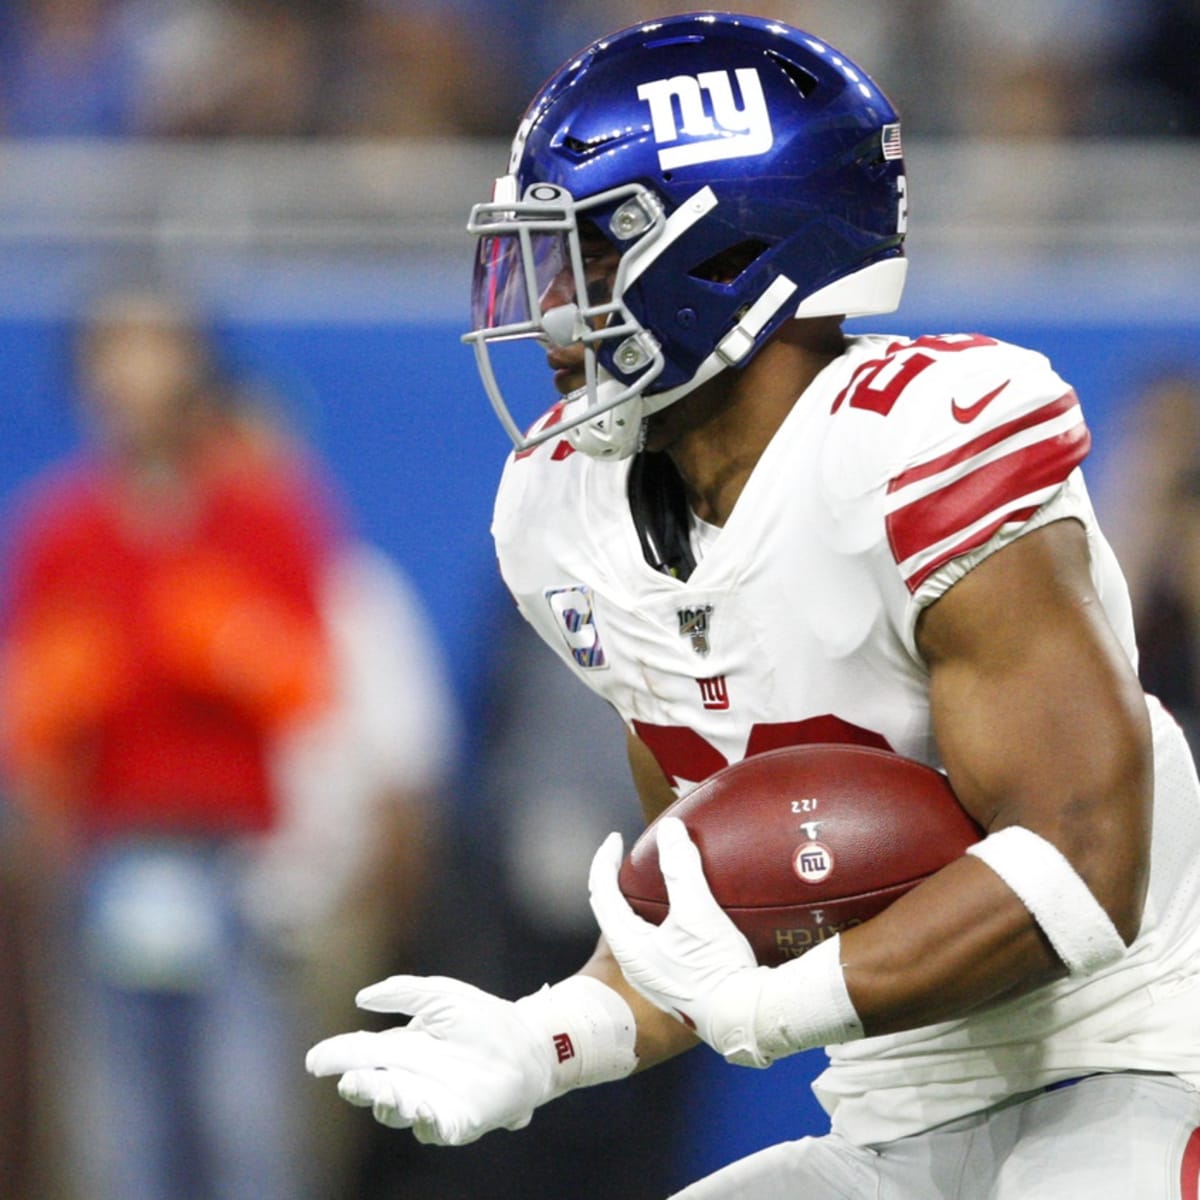 Saquon Barkley wows at NY Giants practice, first scare of camp follows